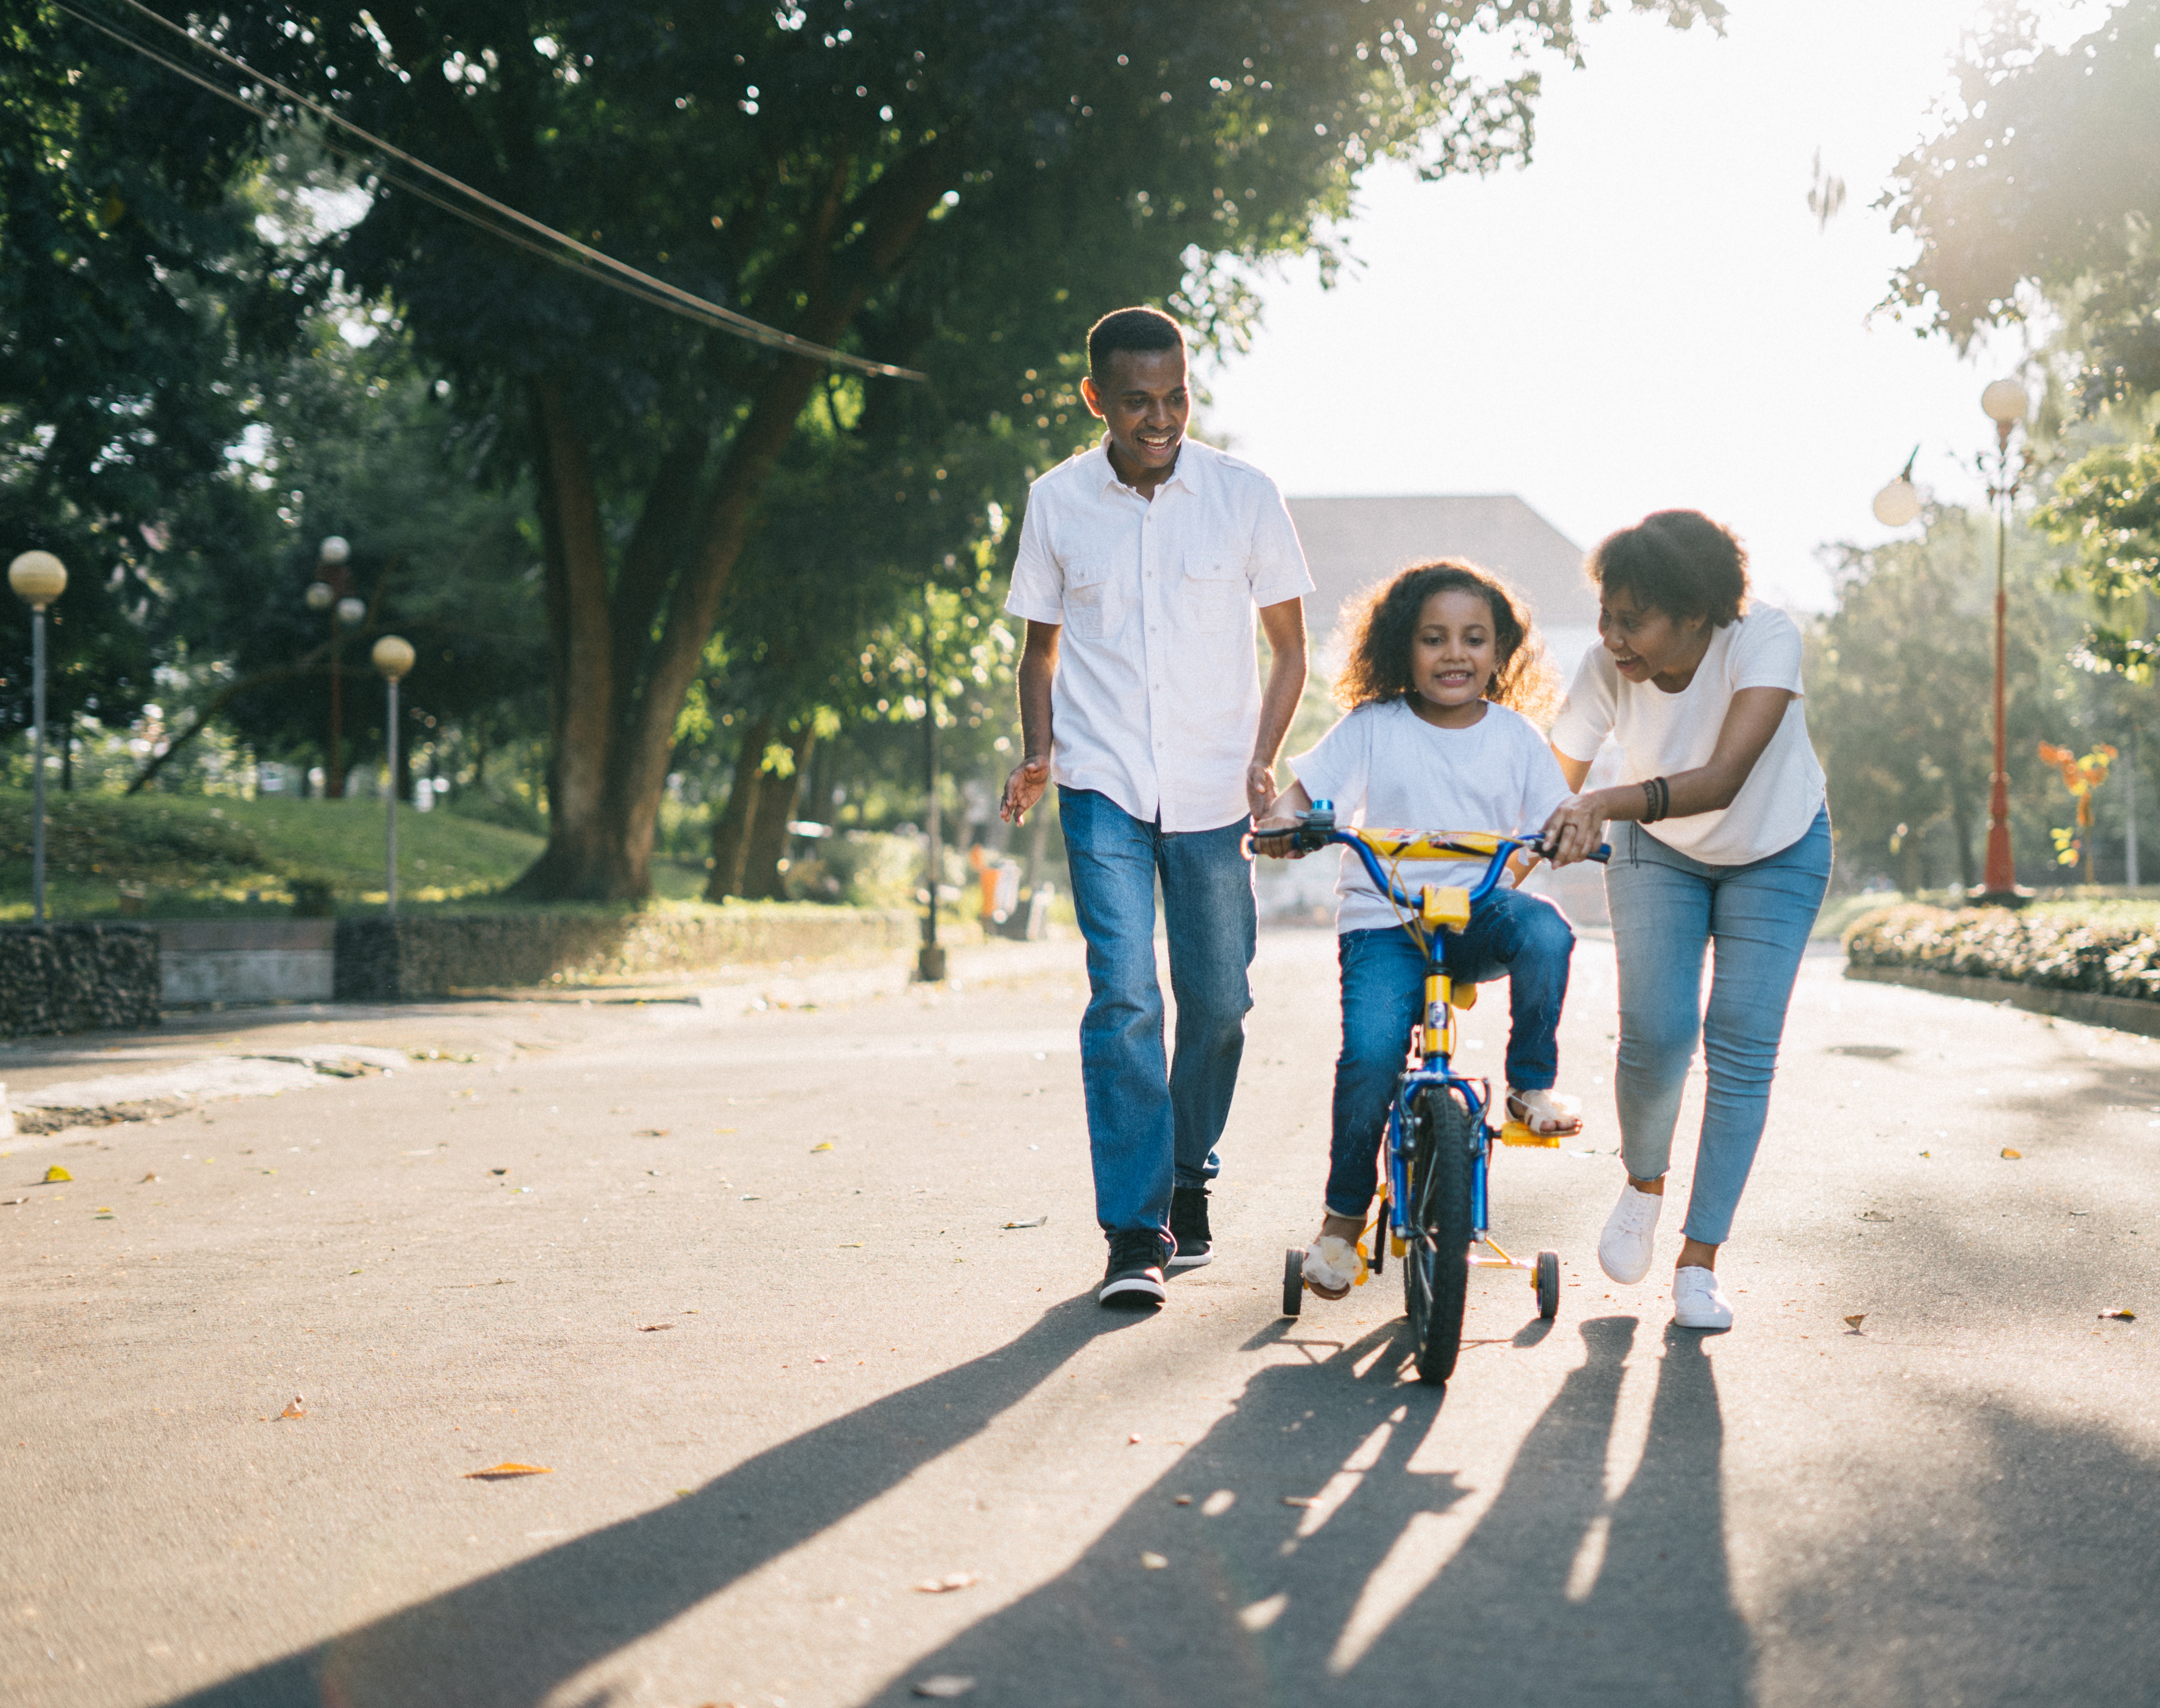 child riding bicycle with mother assisting and father walking alongside